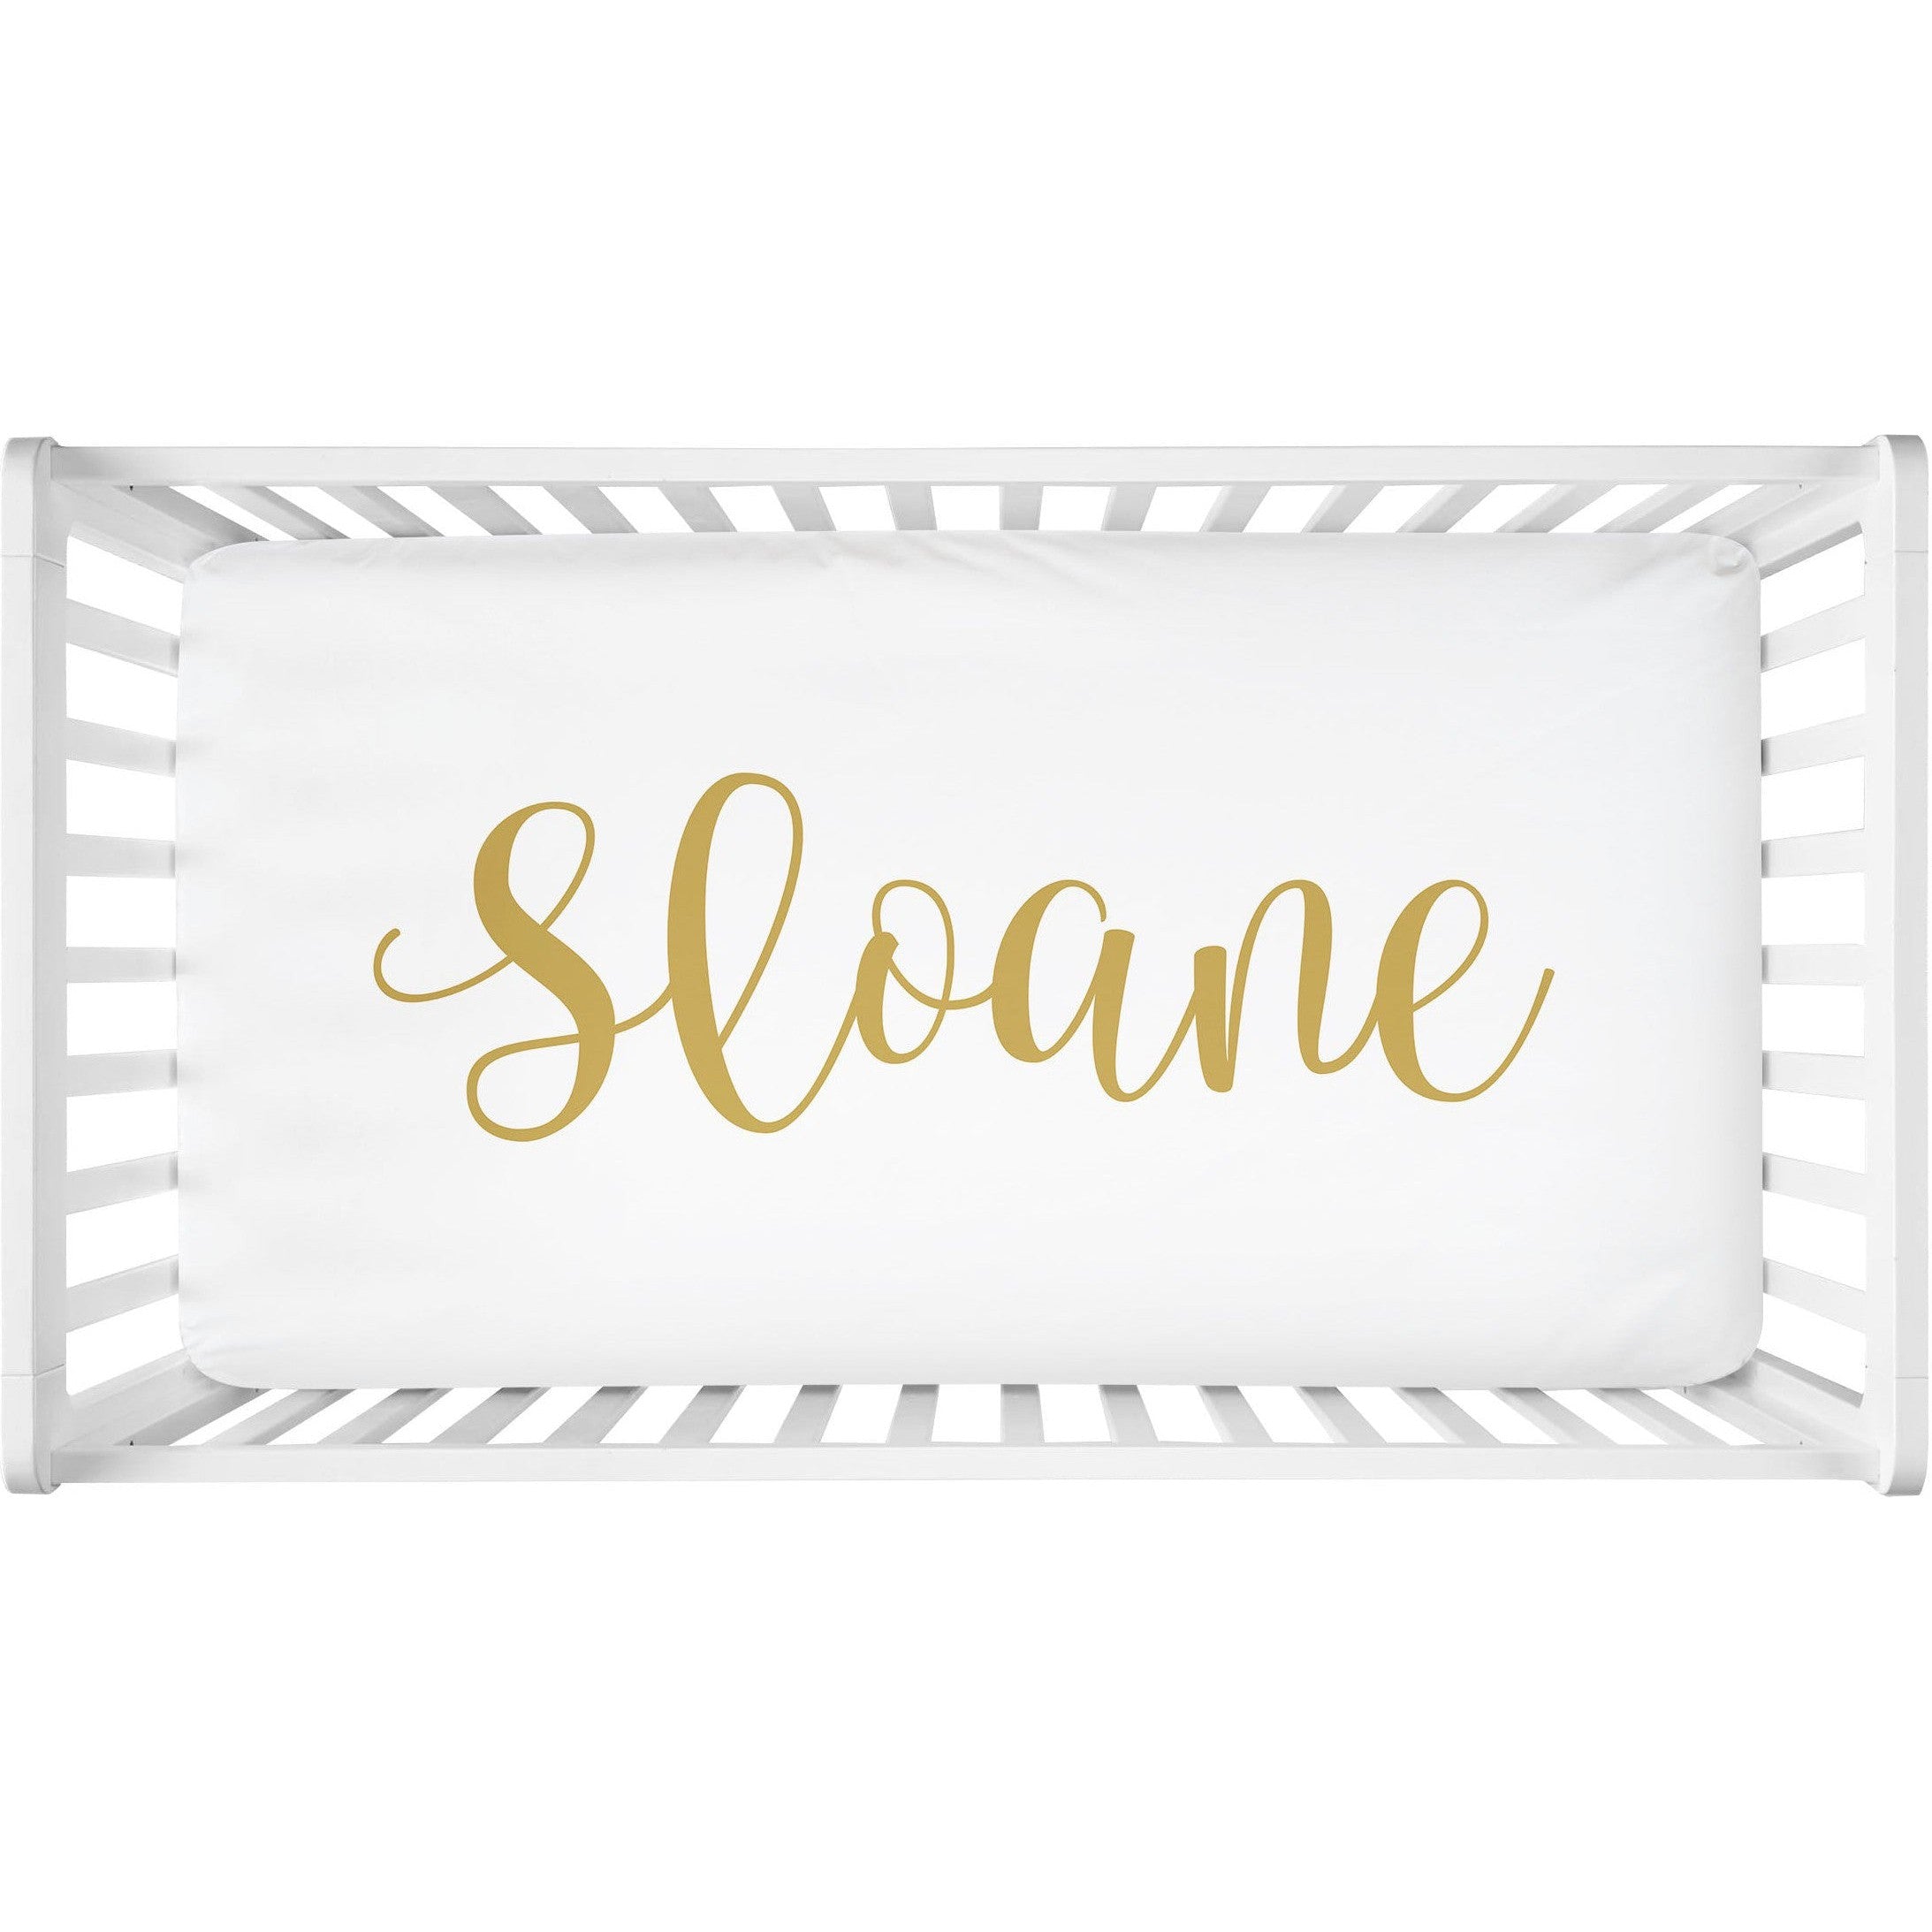 Sugar + Maple Personalized Crib Sheet | Centered Name - Twinkle Twinkle Little One